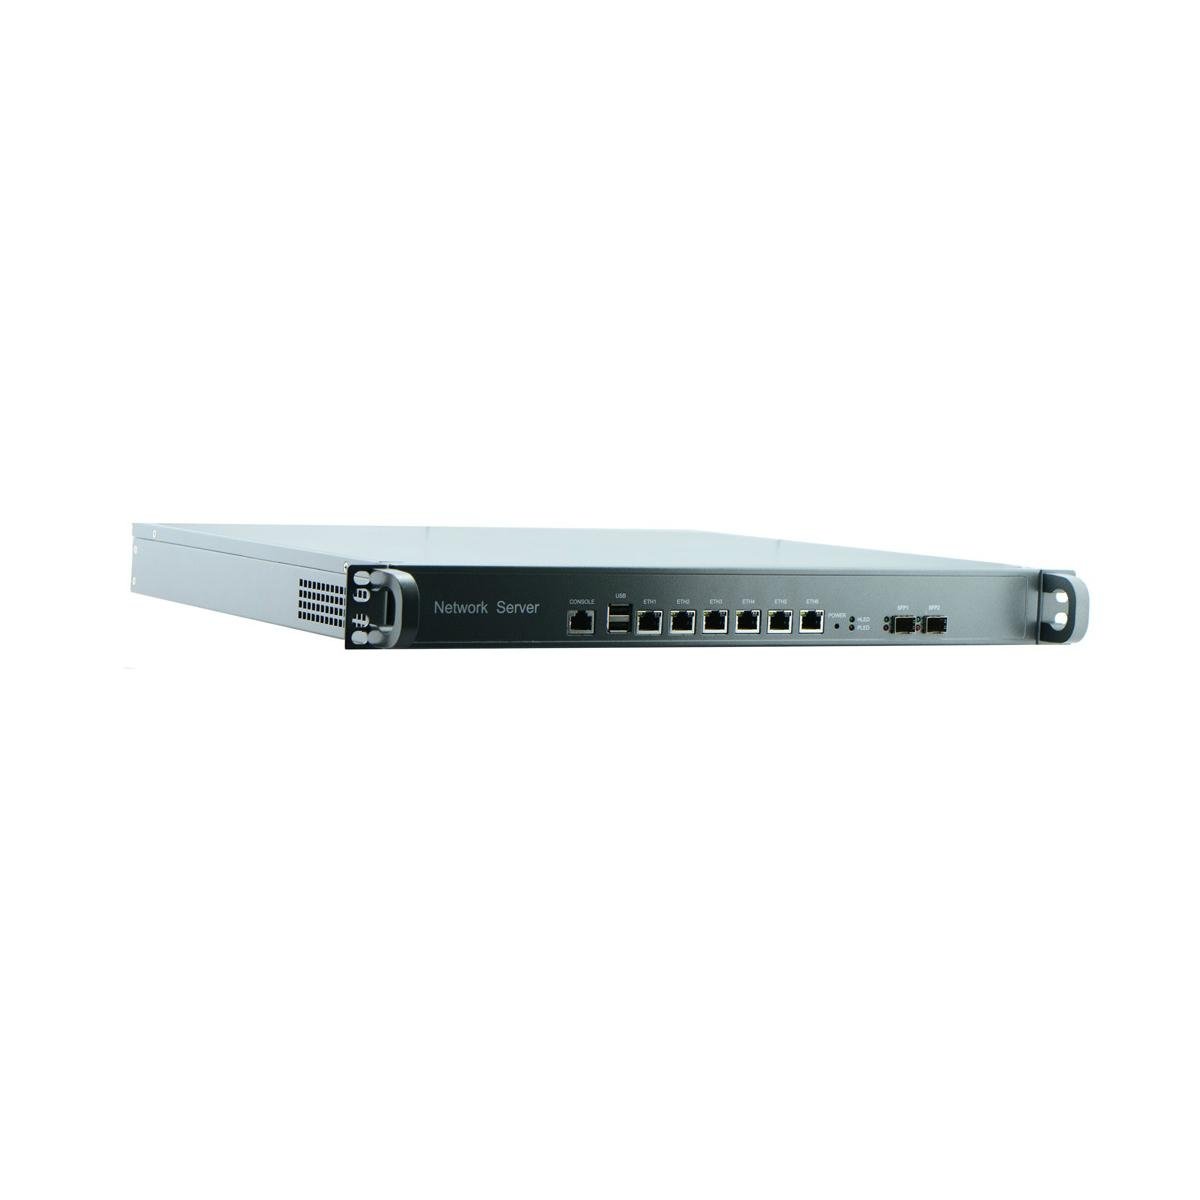 Intel H67 1U Industrial Rackmount Barebone for Network Security with 6Nic, 2SFP 